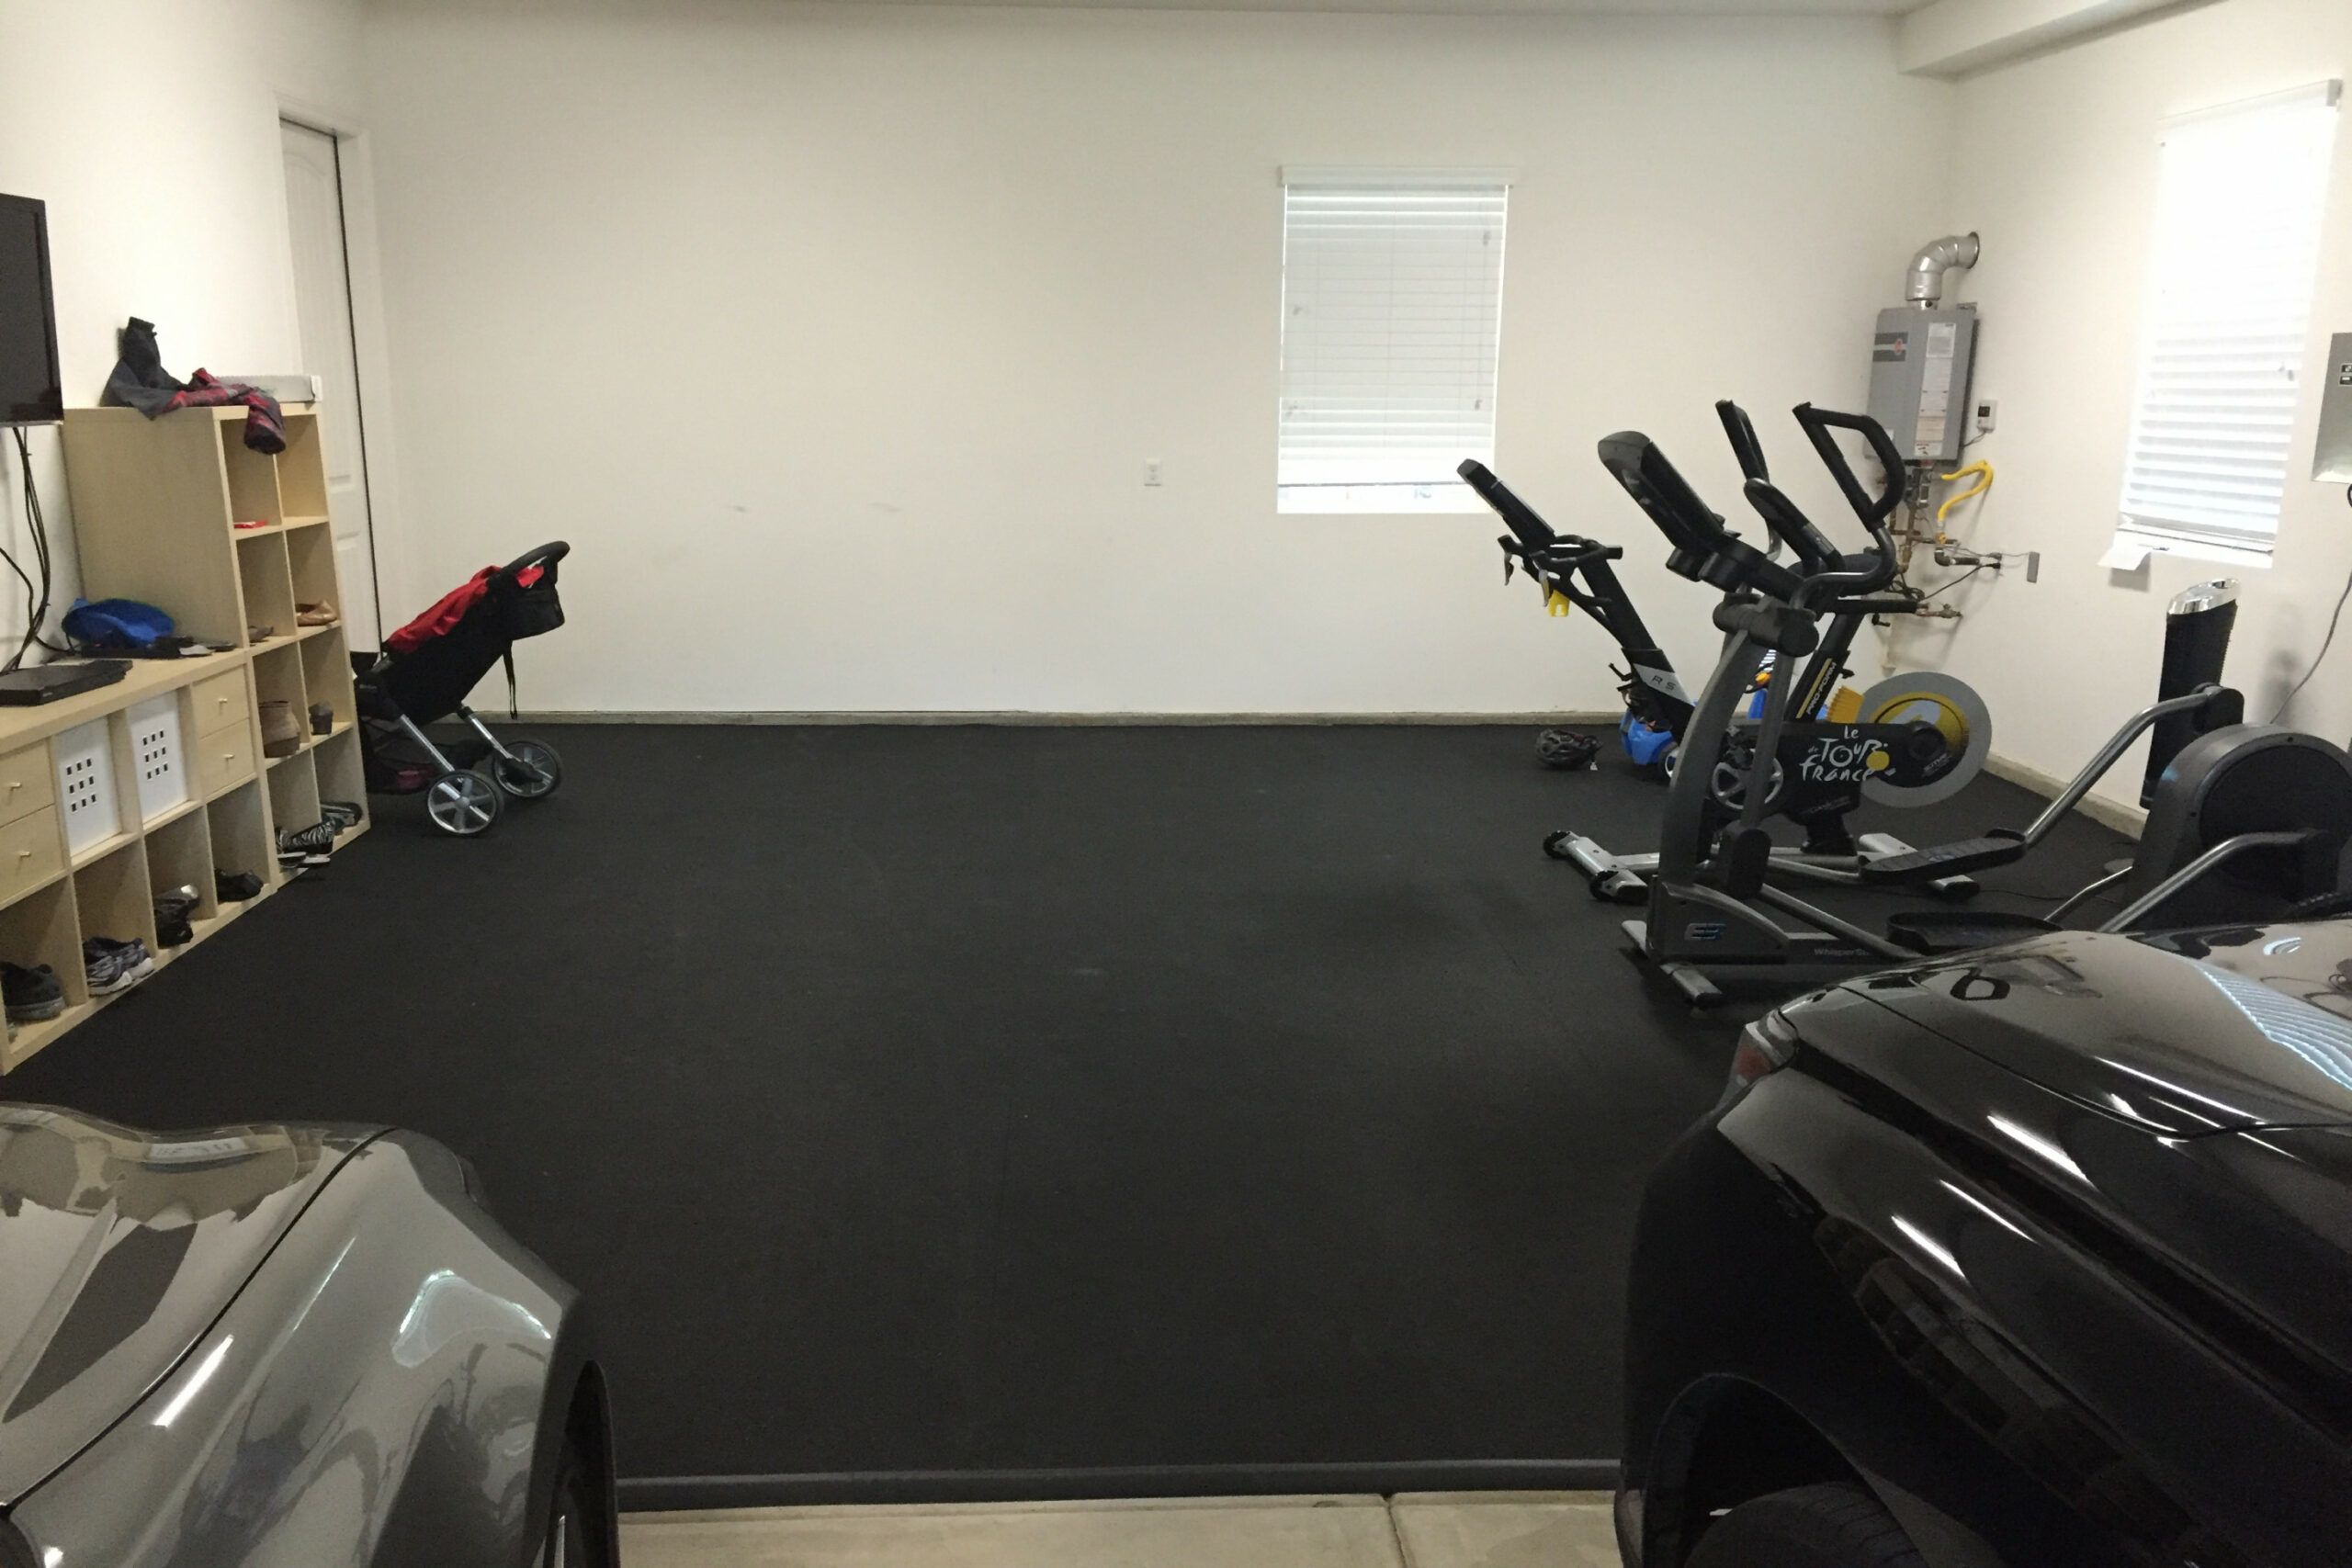 Rubber Flooring for Non-Traditional Garage Uses